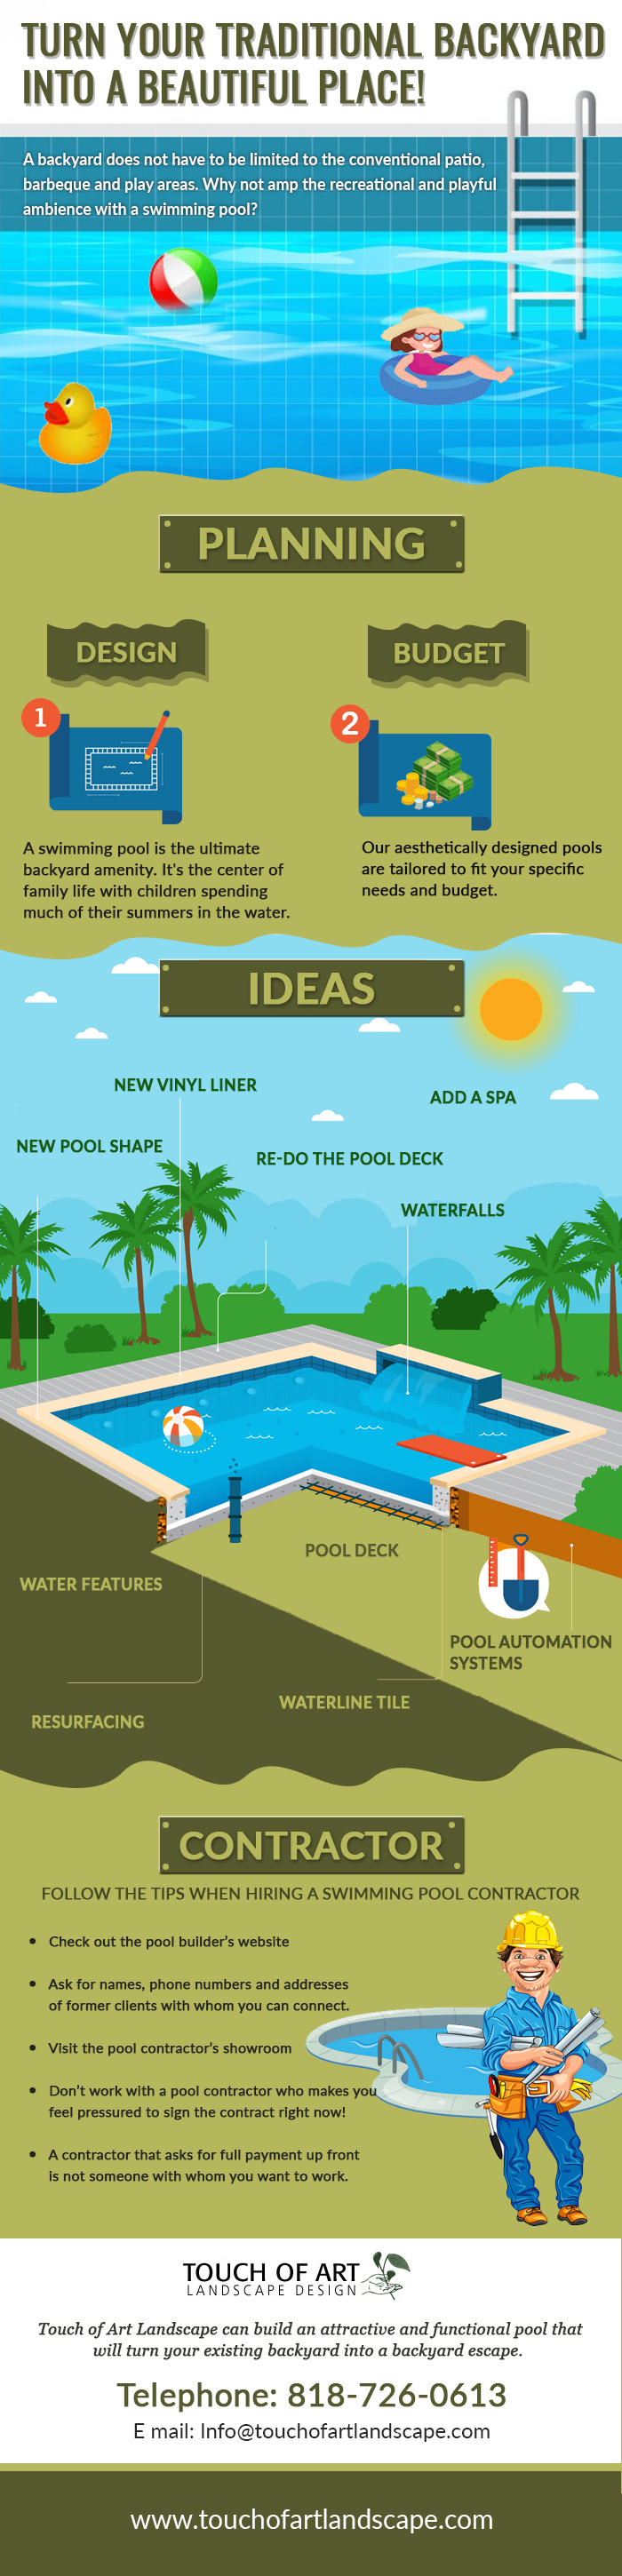 tips to find pool construction companies